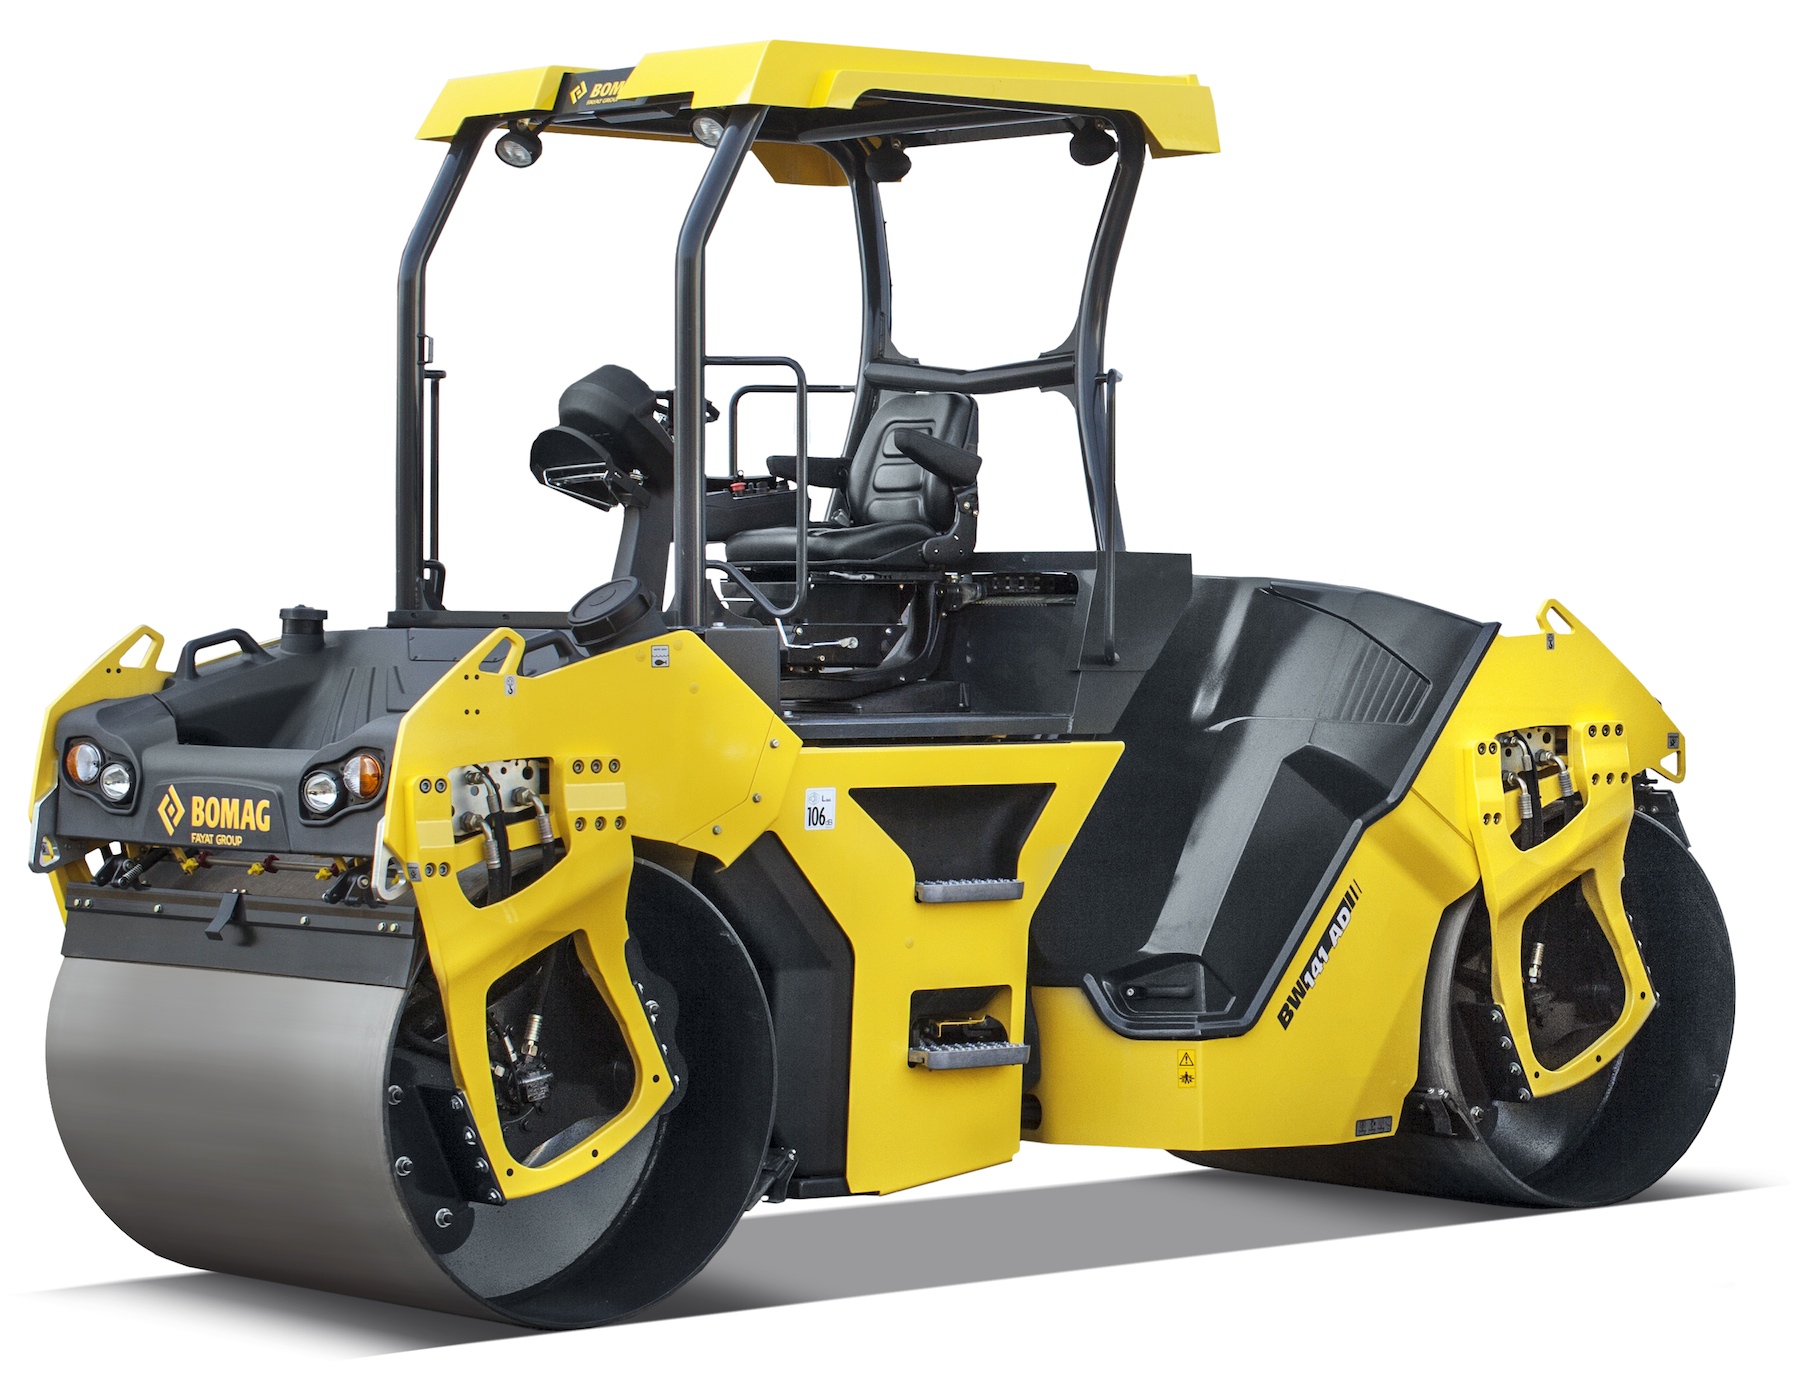 Bomag BW141AD-5, BW151AD-5 tandem vibratory rollers feature crab ...